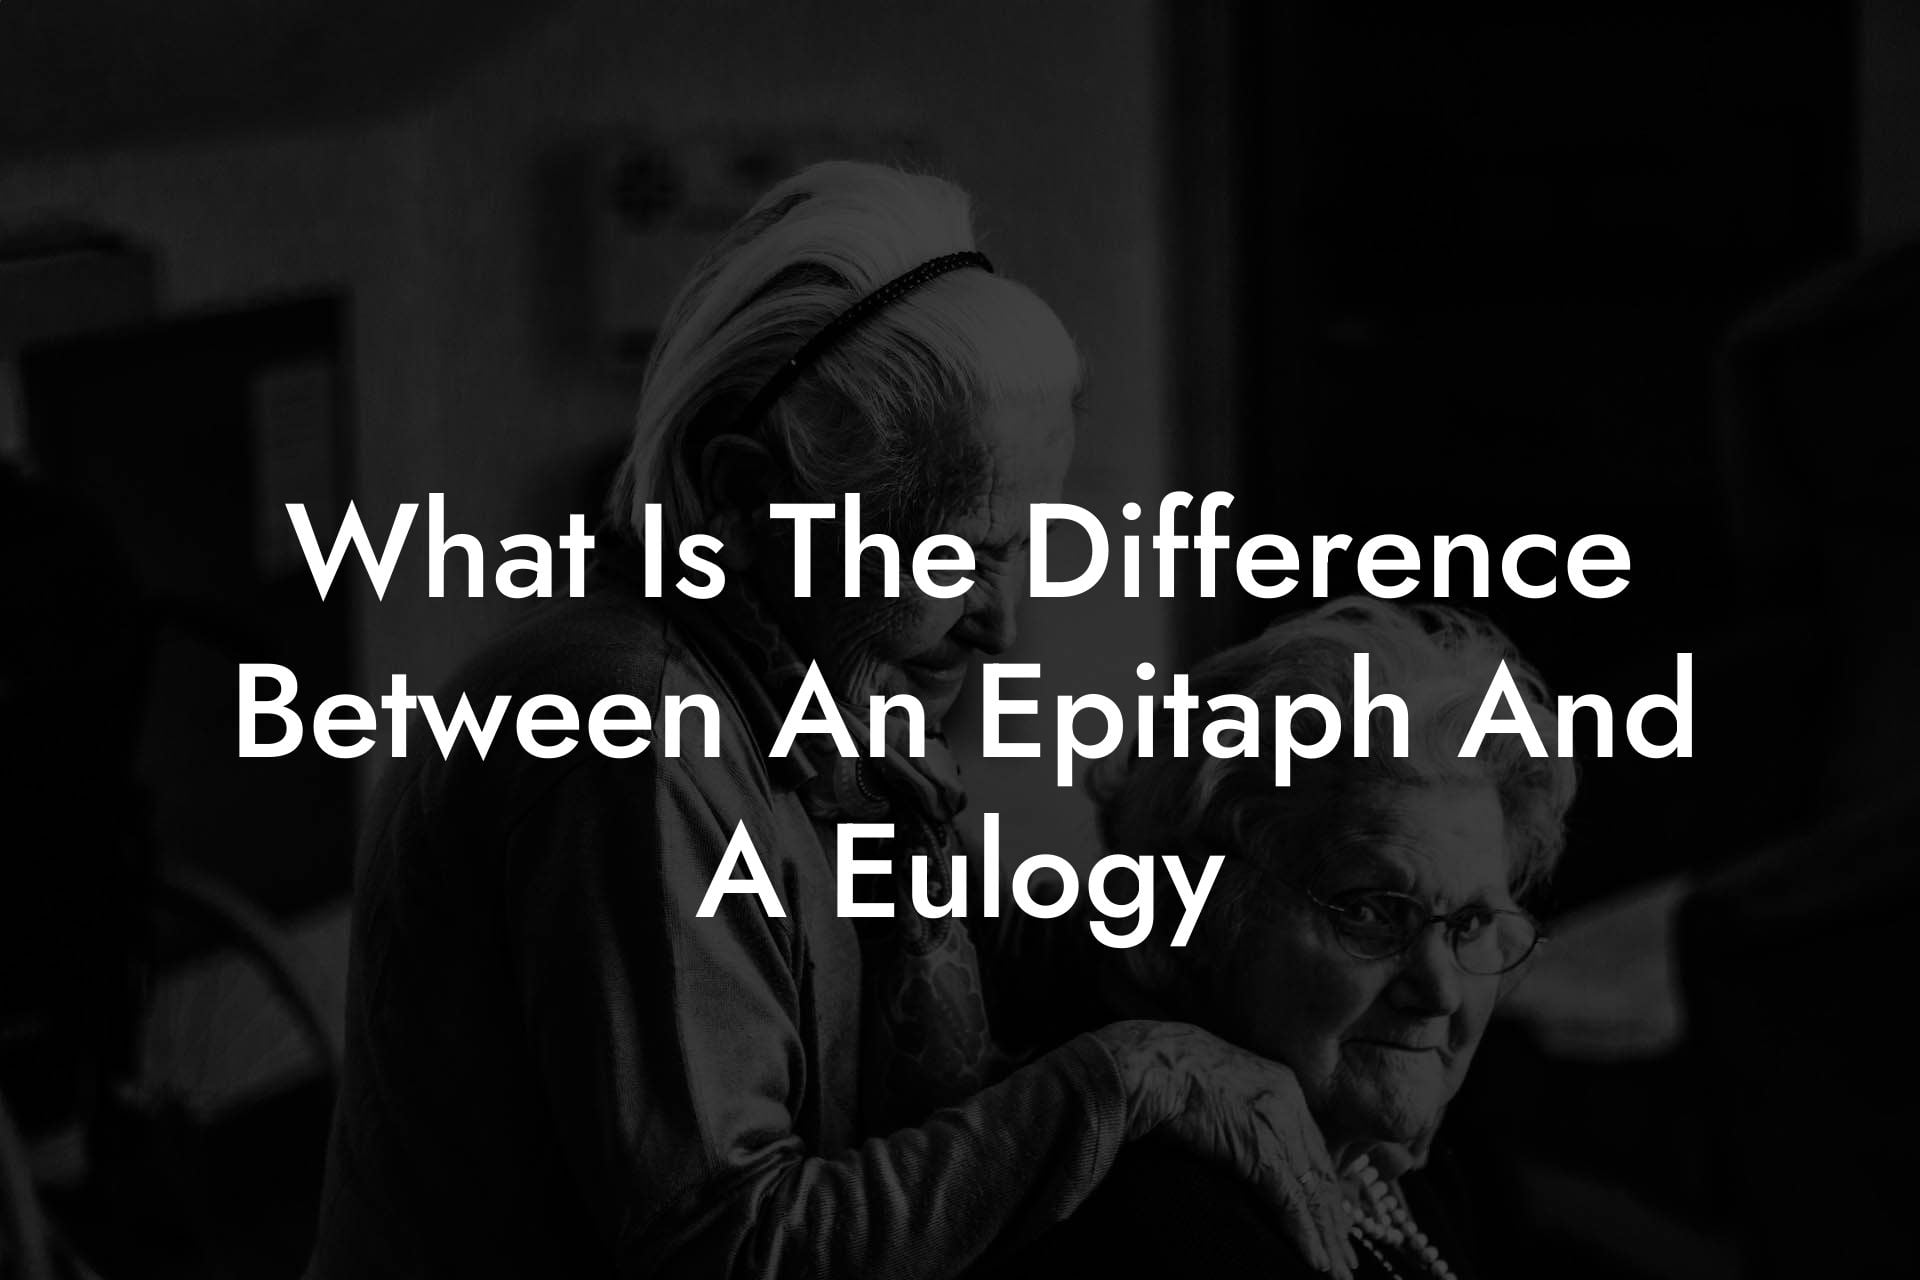 What Is The Difference Between An Epitaph And A Eulogy